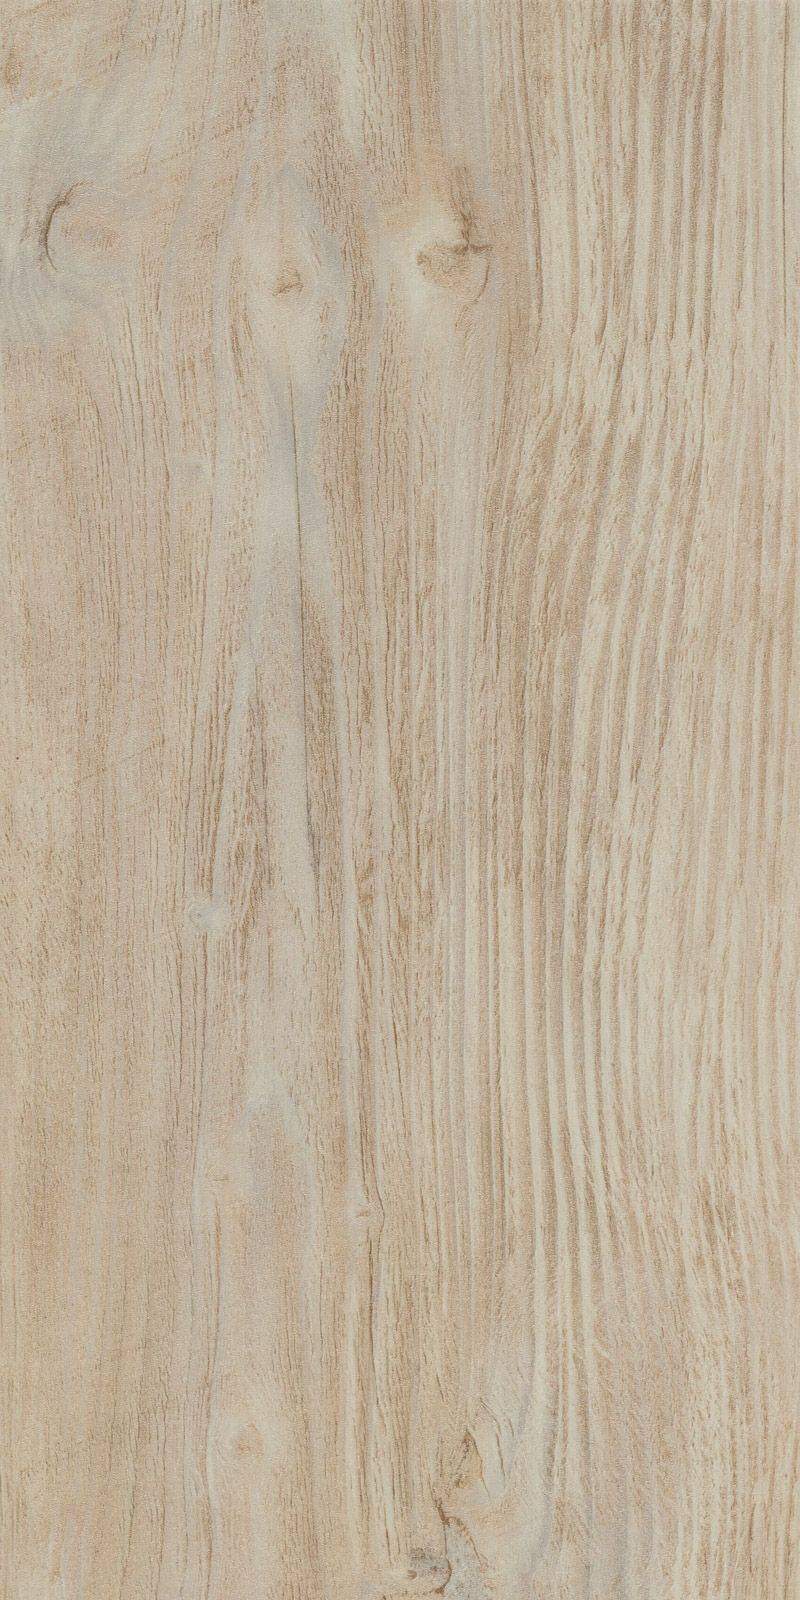 FORBO ALLURA WOOD BLEACHED RUSTIC PINE 60084DR7 120*20